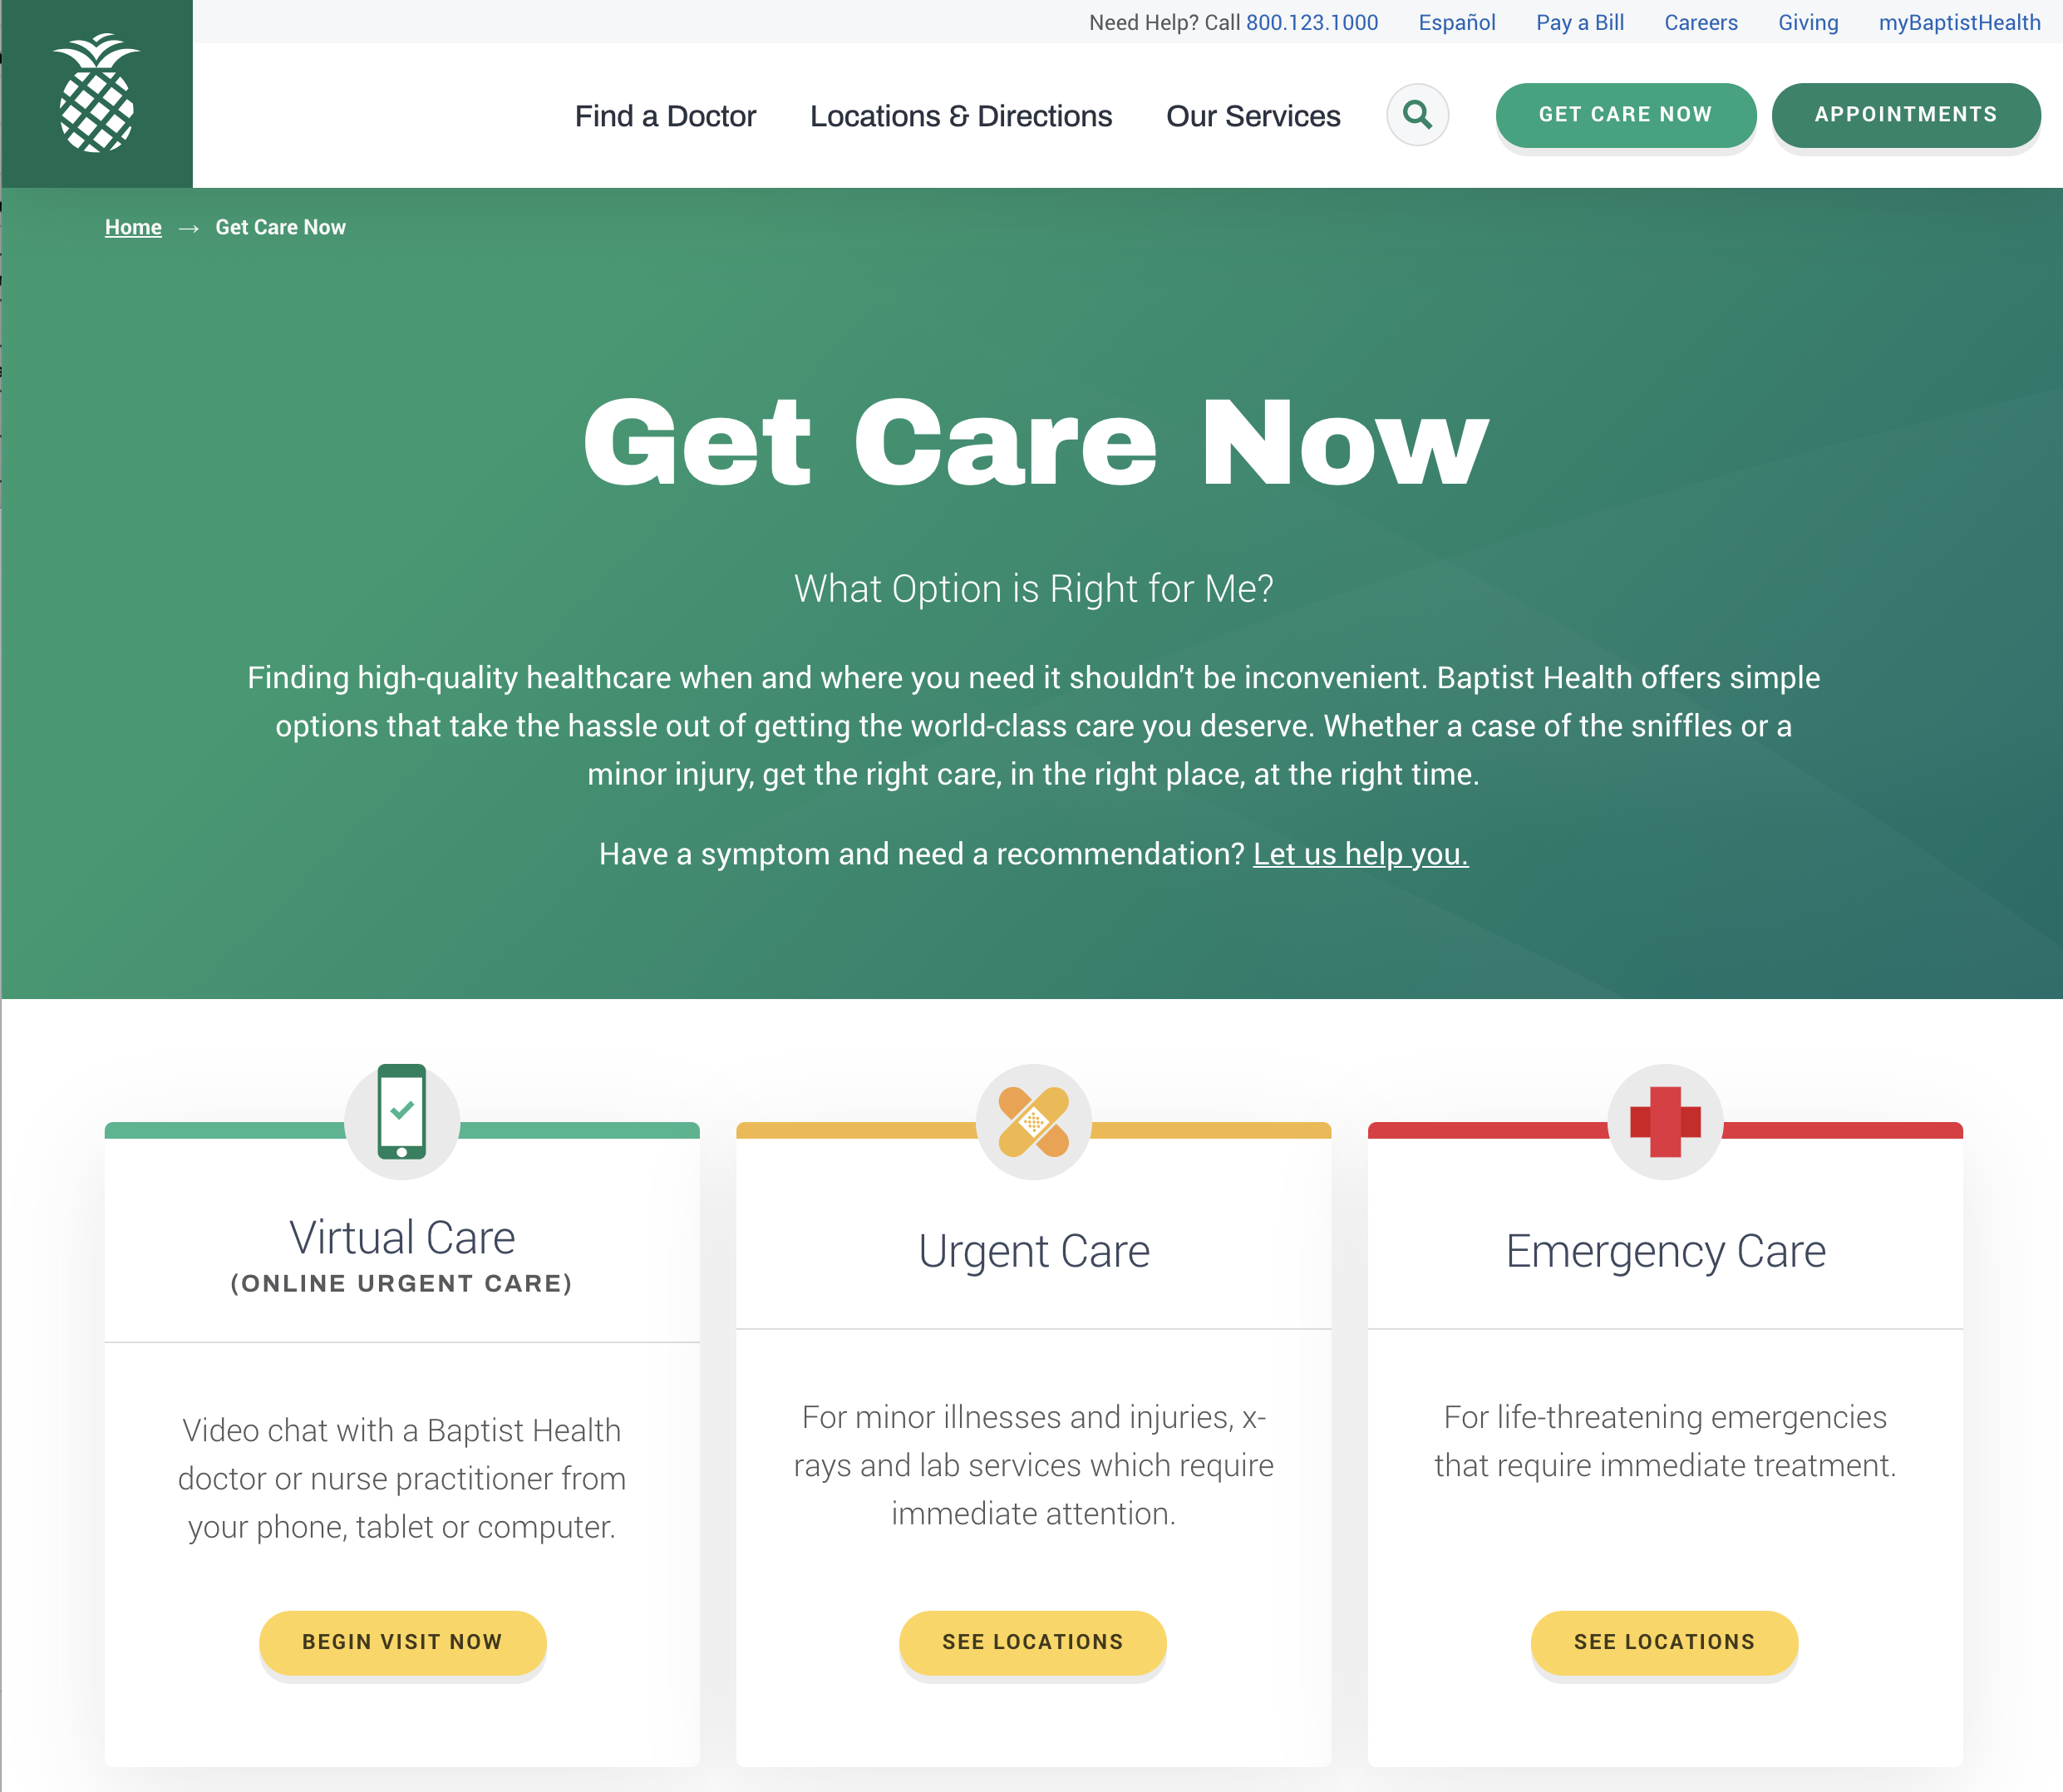 Image of "Get Care Now" page with prominent callouts for "Virtual Care", "Urgent Care" and "Emergency Care"